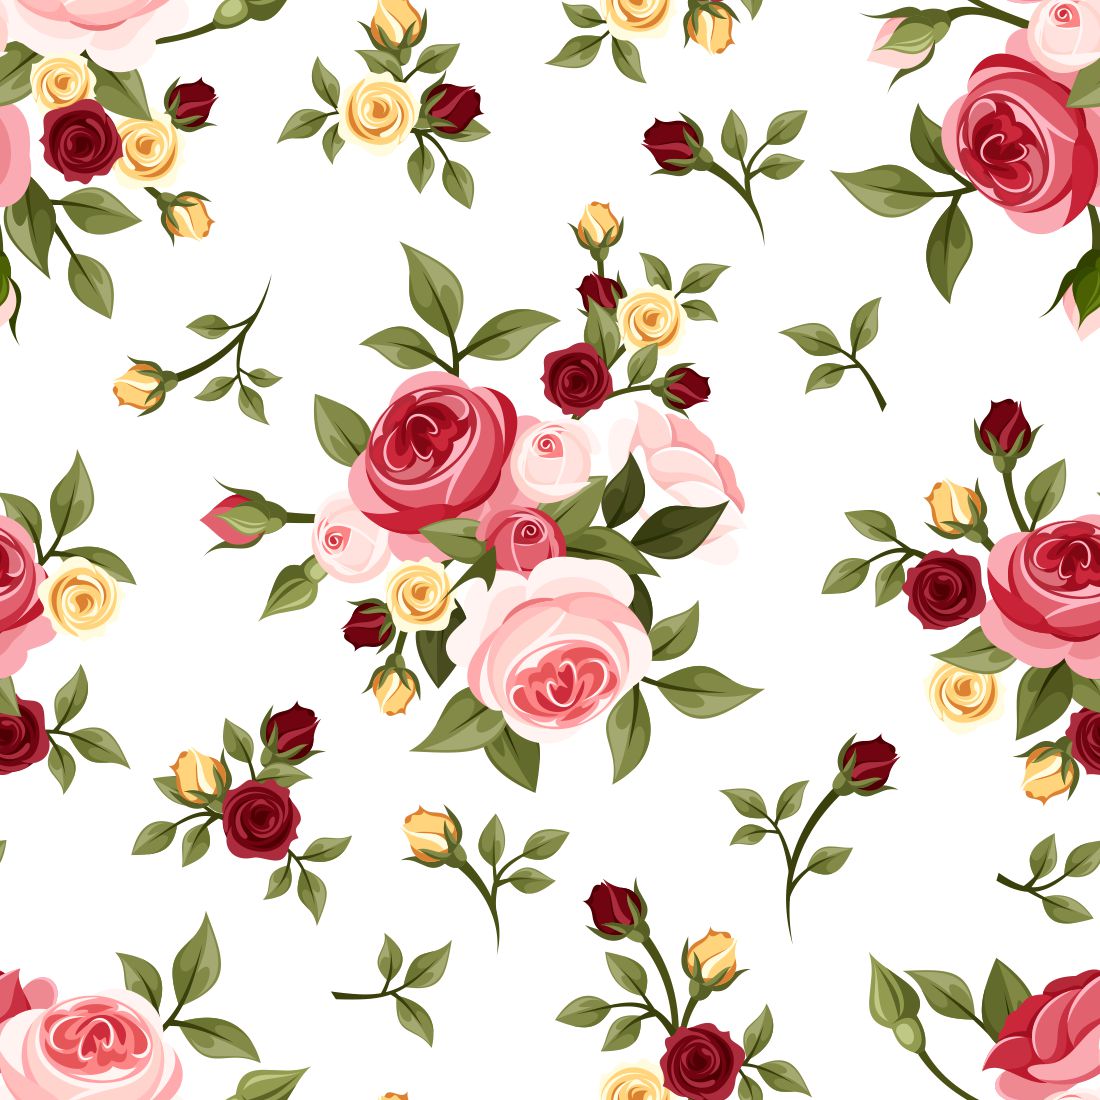 20 Plus Turkish Seamless Floral Patterns And Textures.